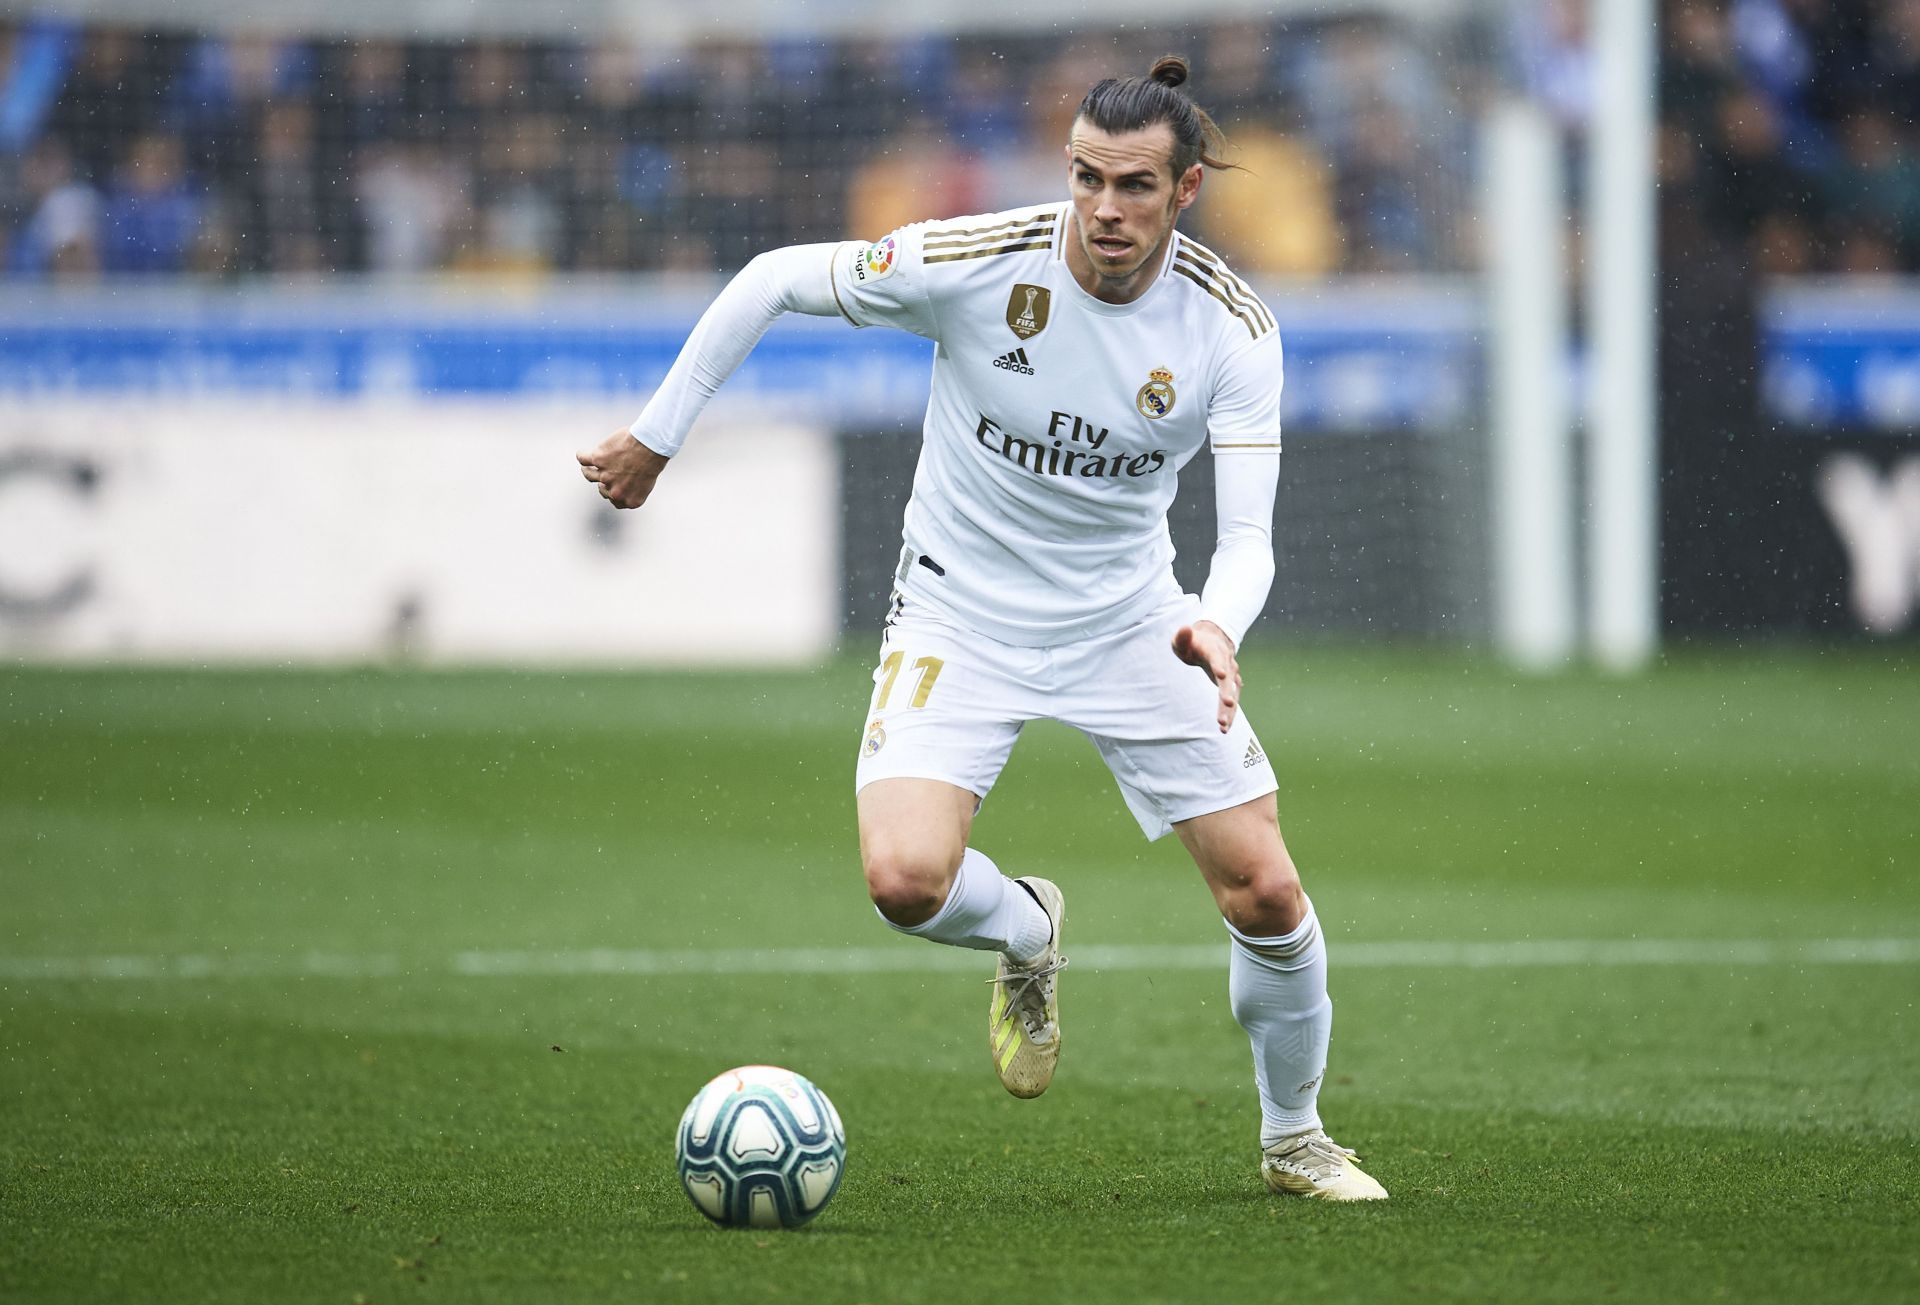 Gareth Bale in action against Deportivo Alaves